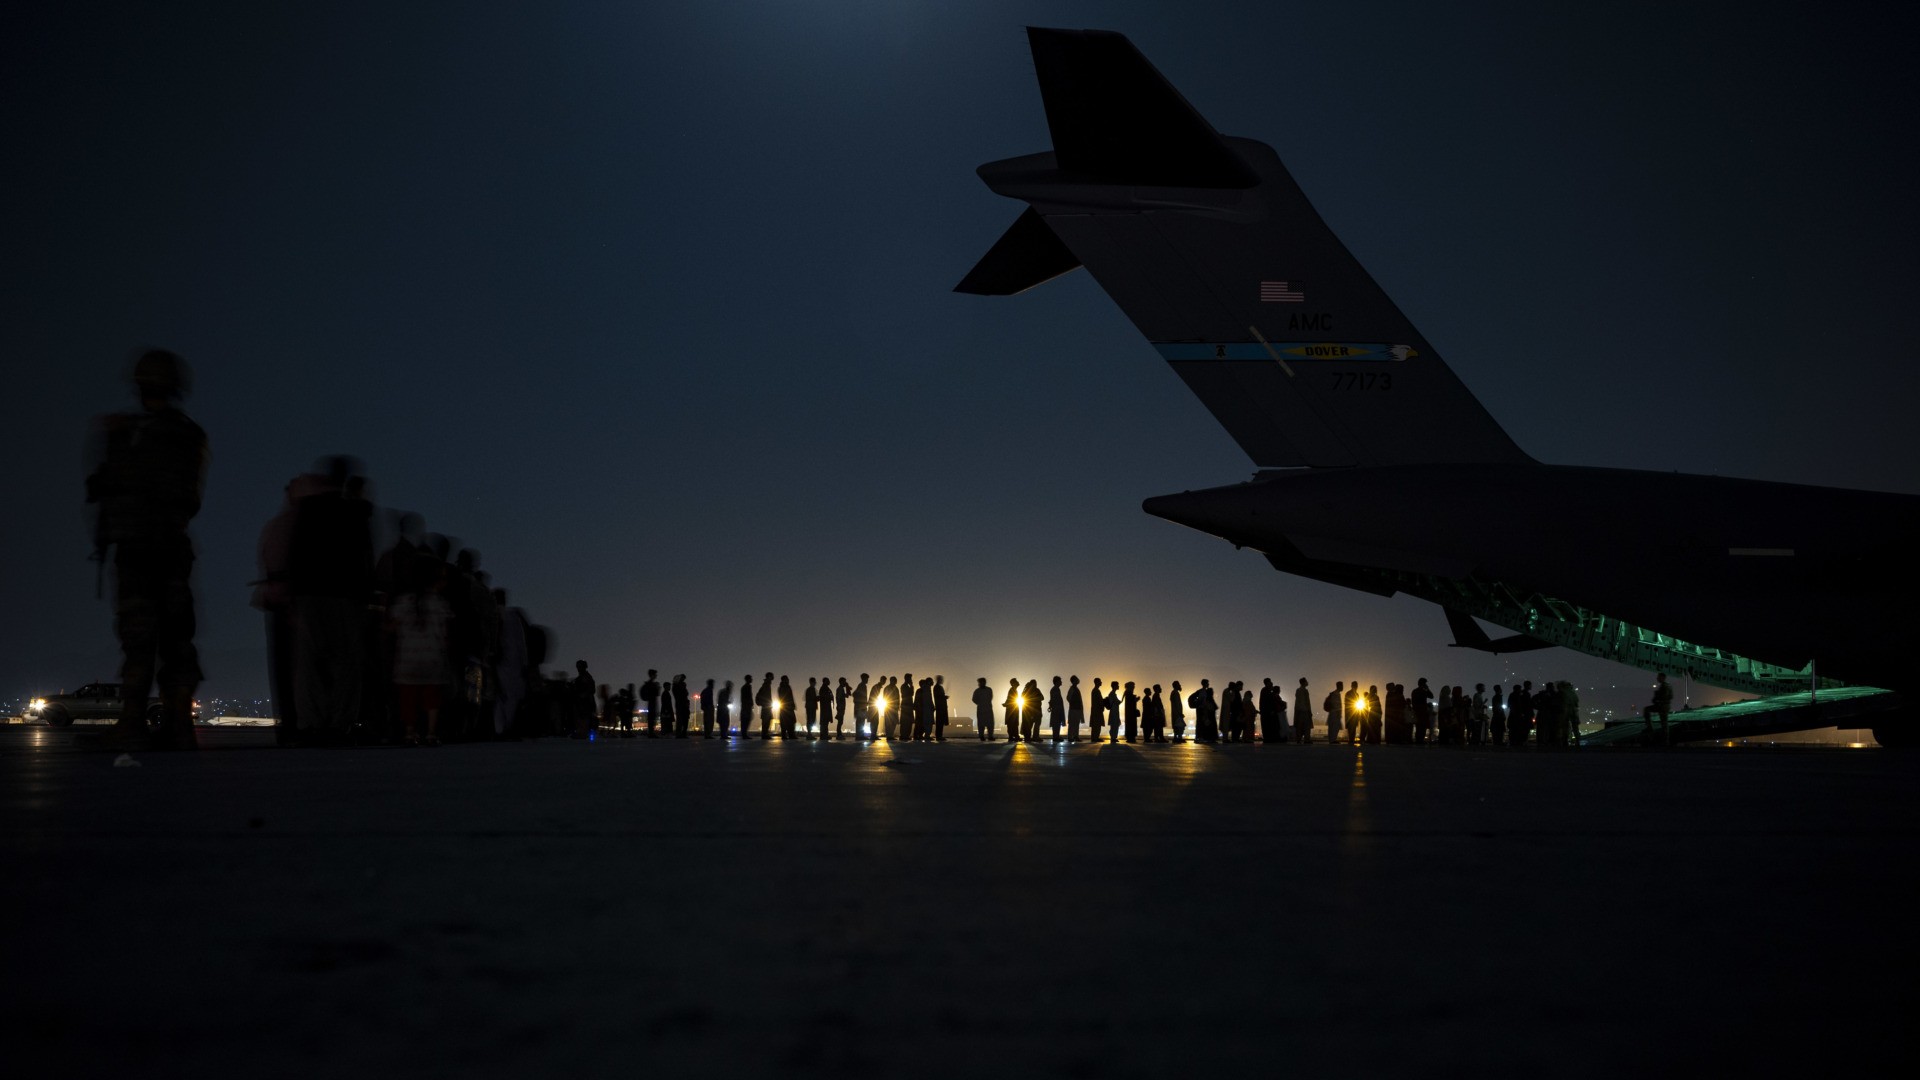 KABUL, AFGHANISTAN - AUGUST 21: In this handout provided by the U.S. Air Force, an air crew prepares to load evacuees aboard a C-17 Globemaster III aircraft in support of the Afghanistan evacuation at Hamid Karzai International Airport on August 21, 2021 in Kabul, Afghanistan. (Photo by Taylor Crul/U.S. Air Force via Getty Images)